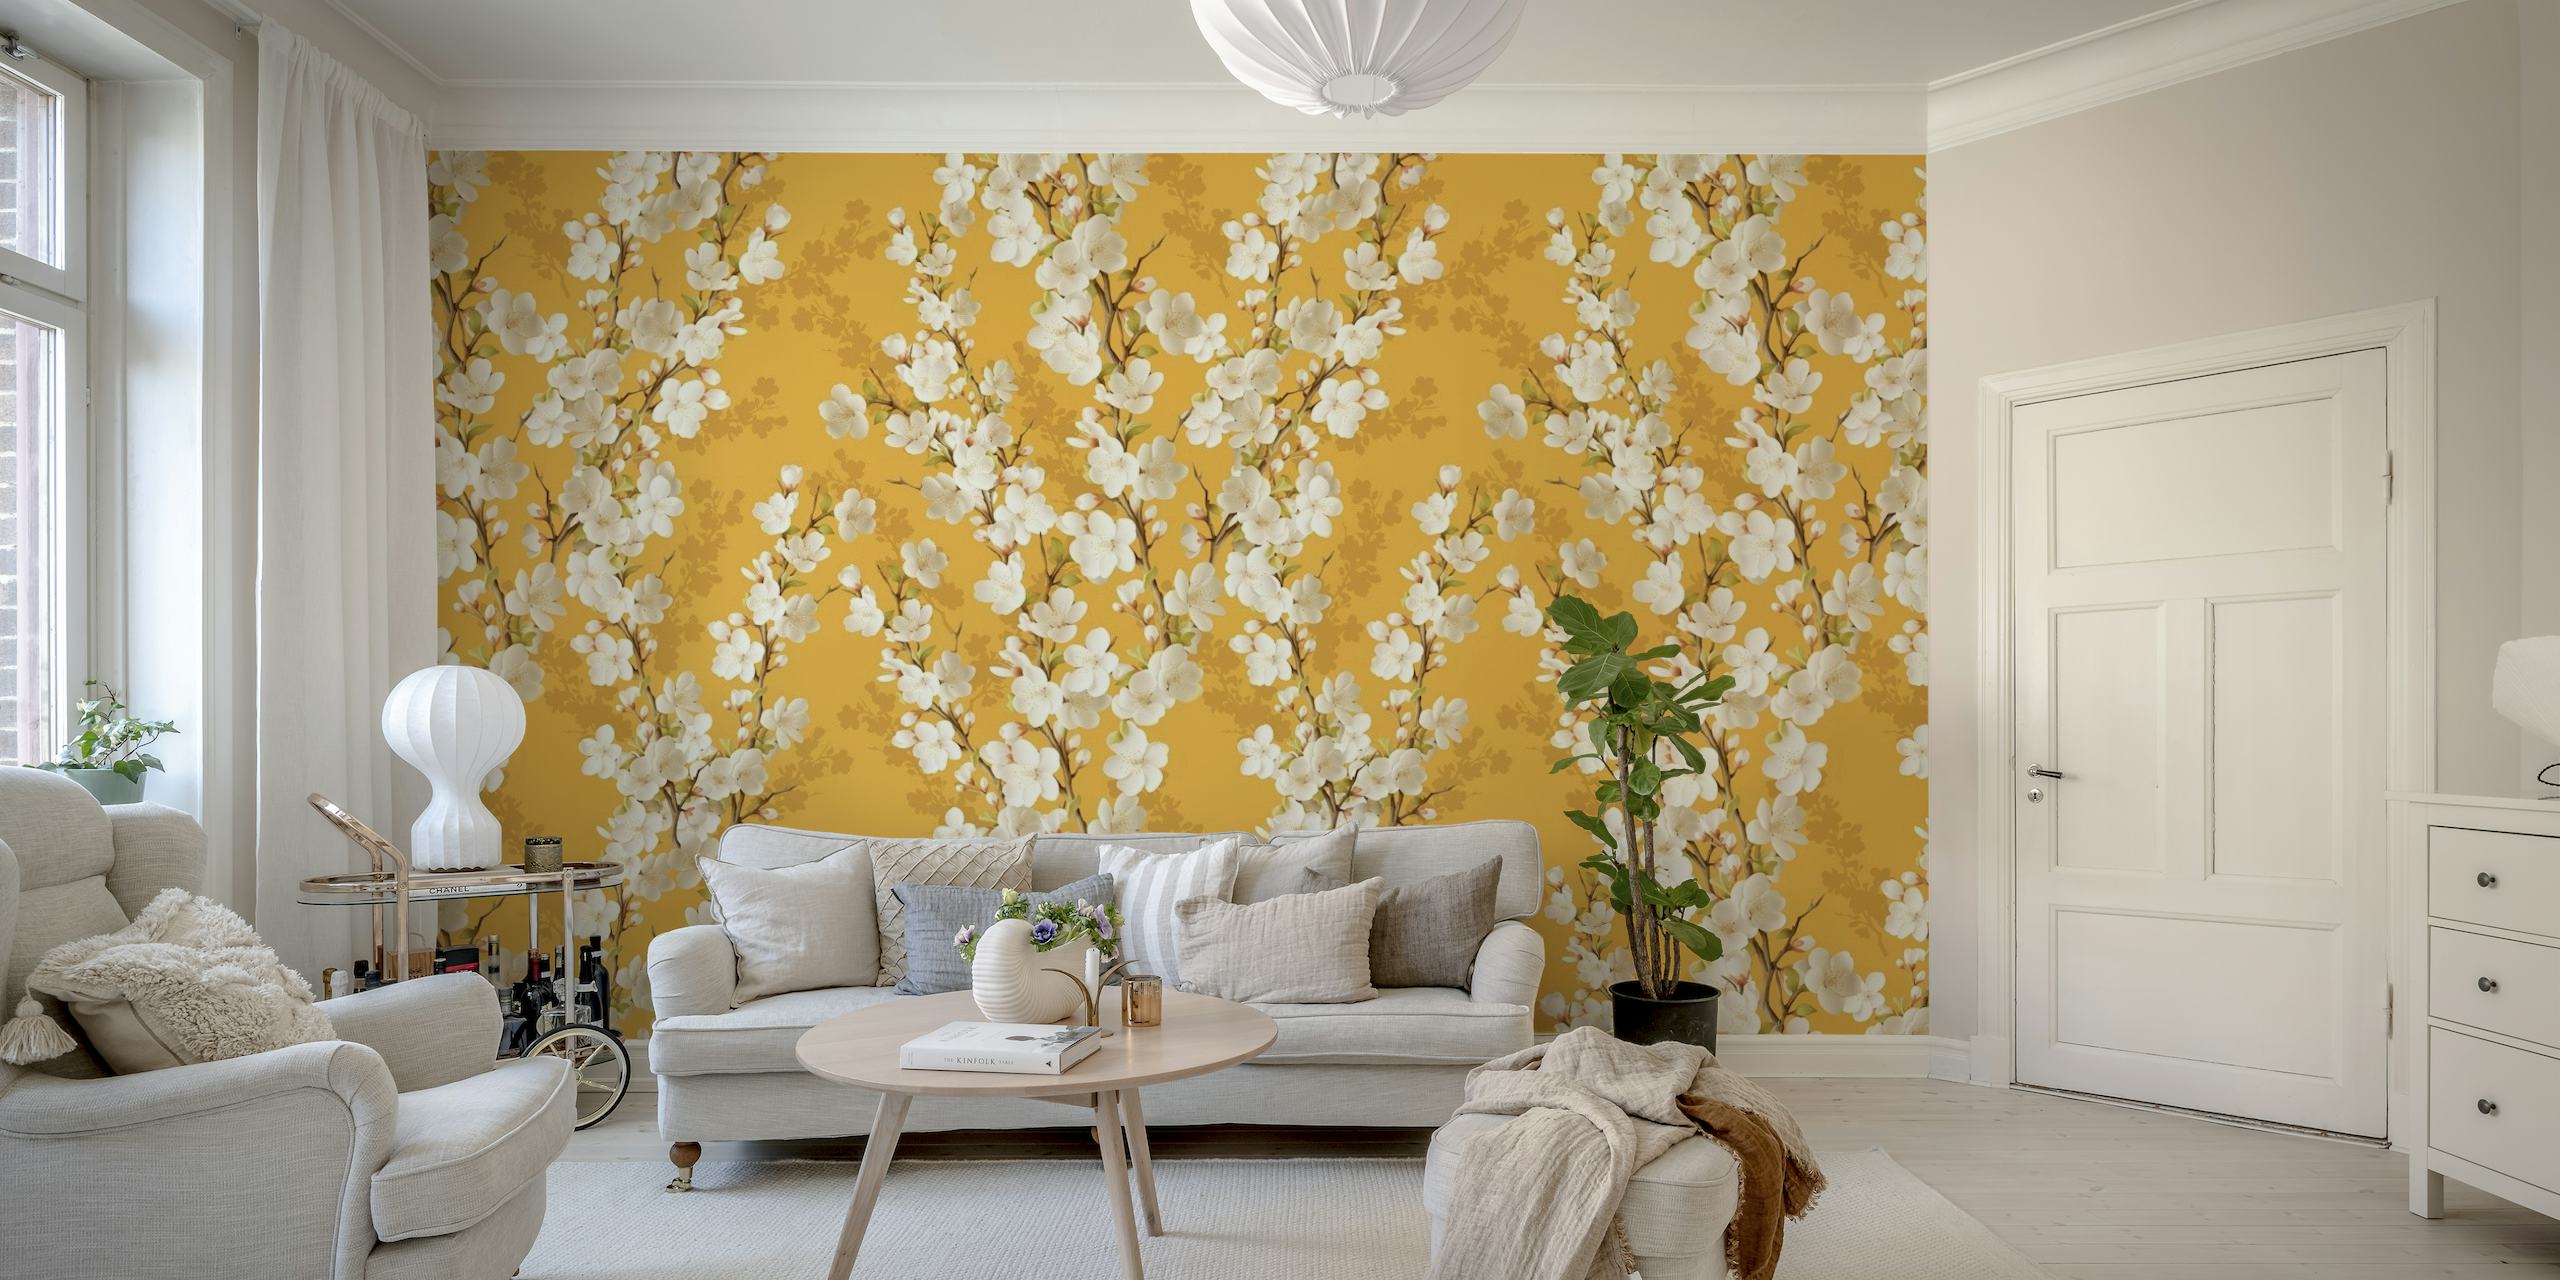 Cherry blossom indian yellow MURAL scale a papel de parede